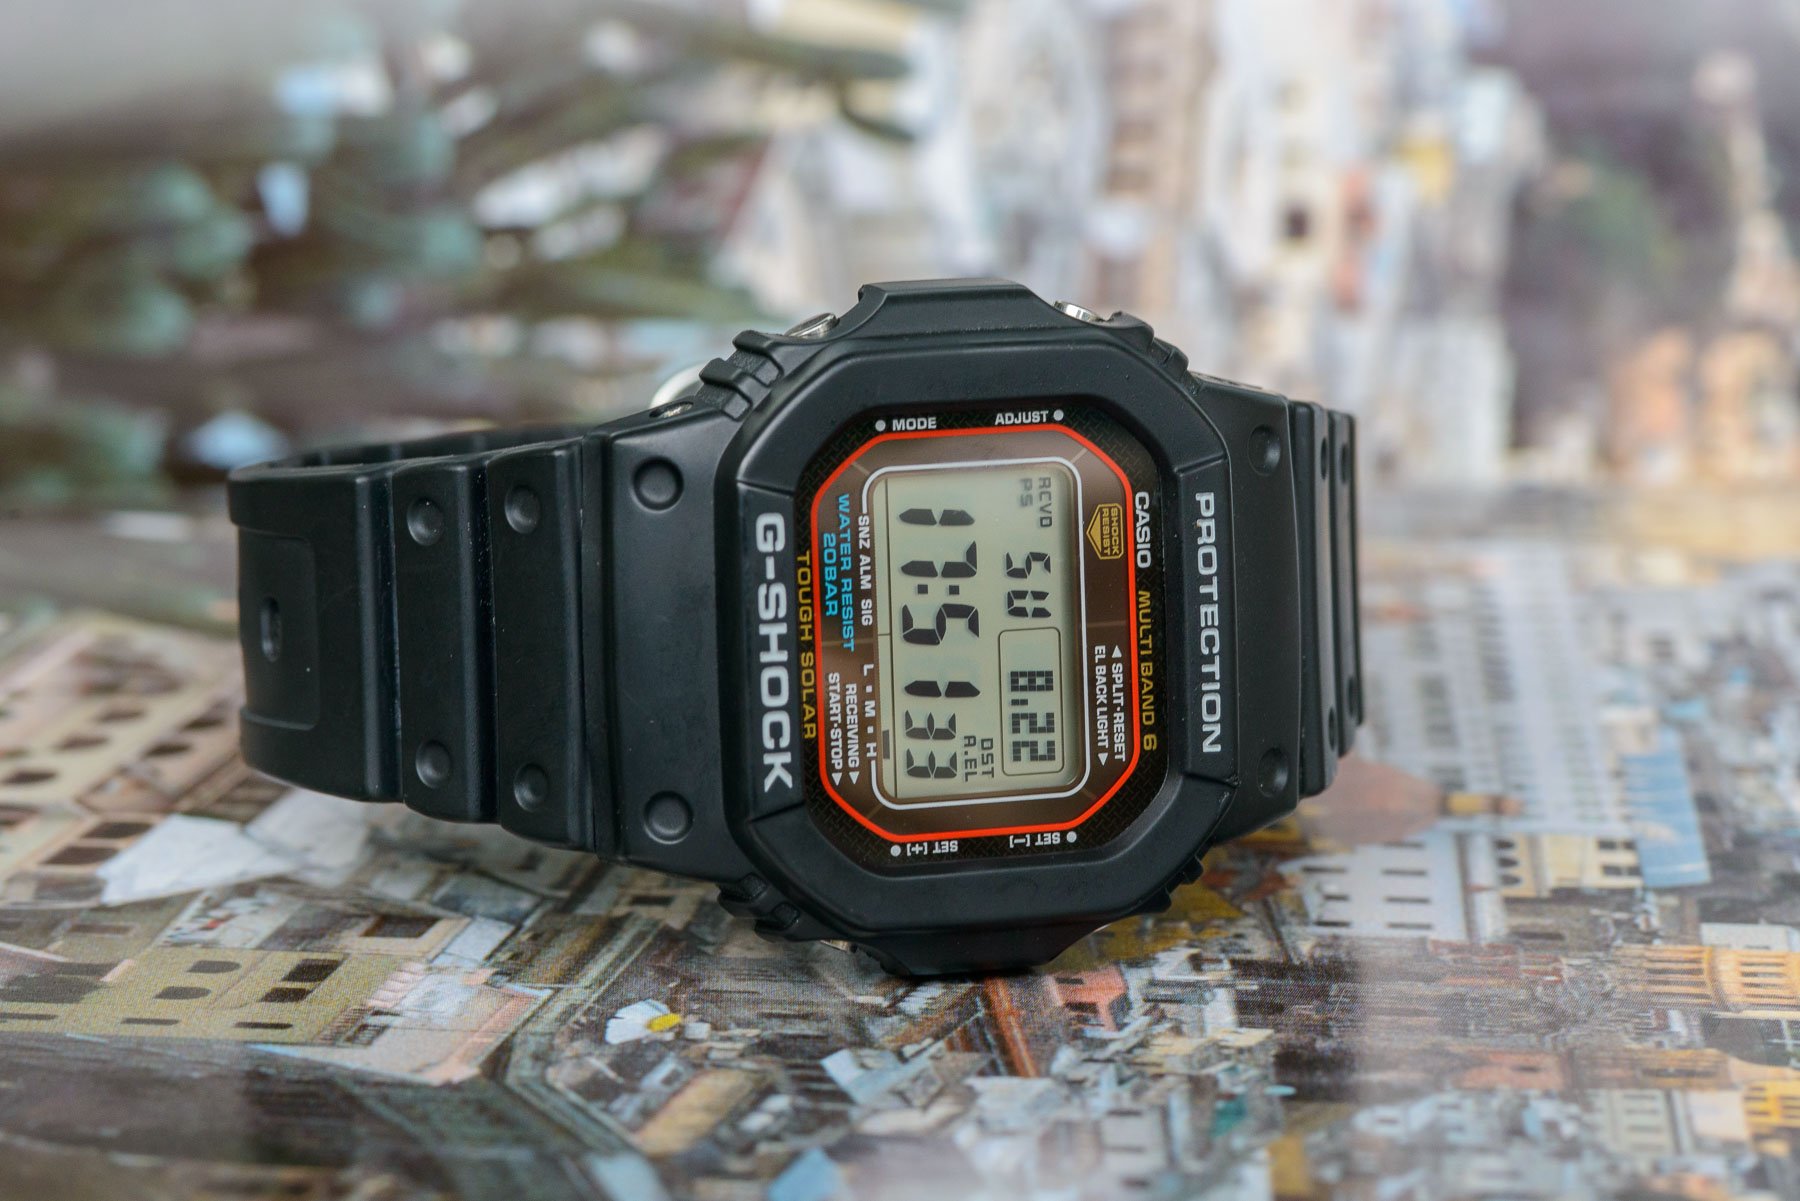 The updated G-Shock Square GW-M5610U with module 3495